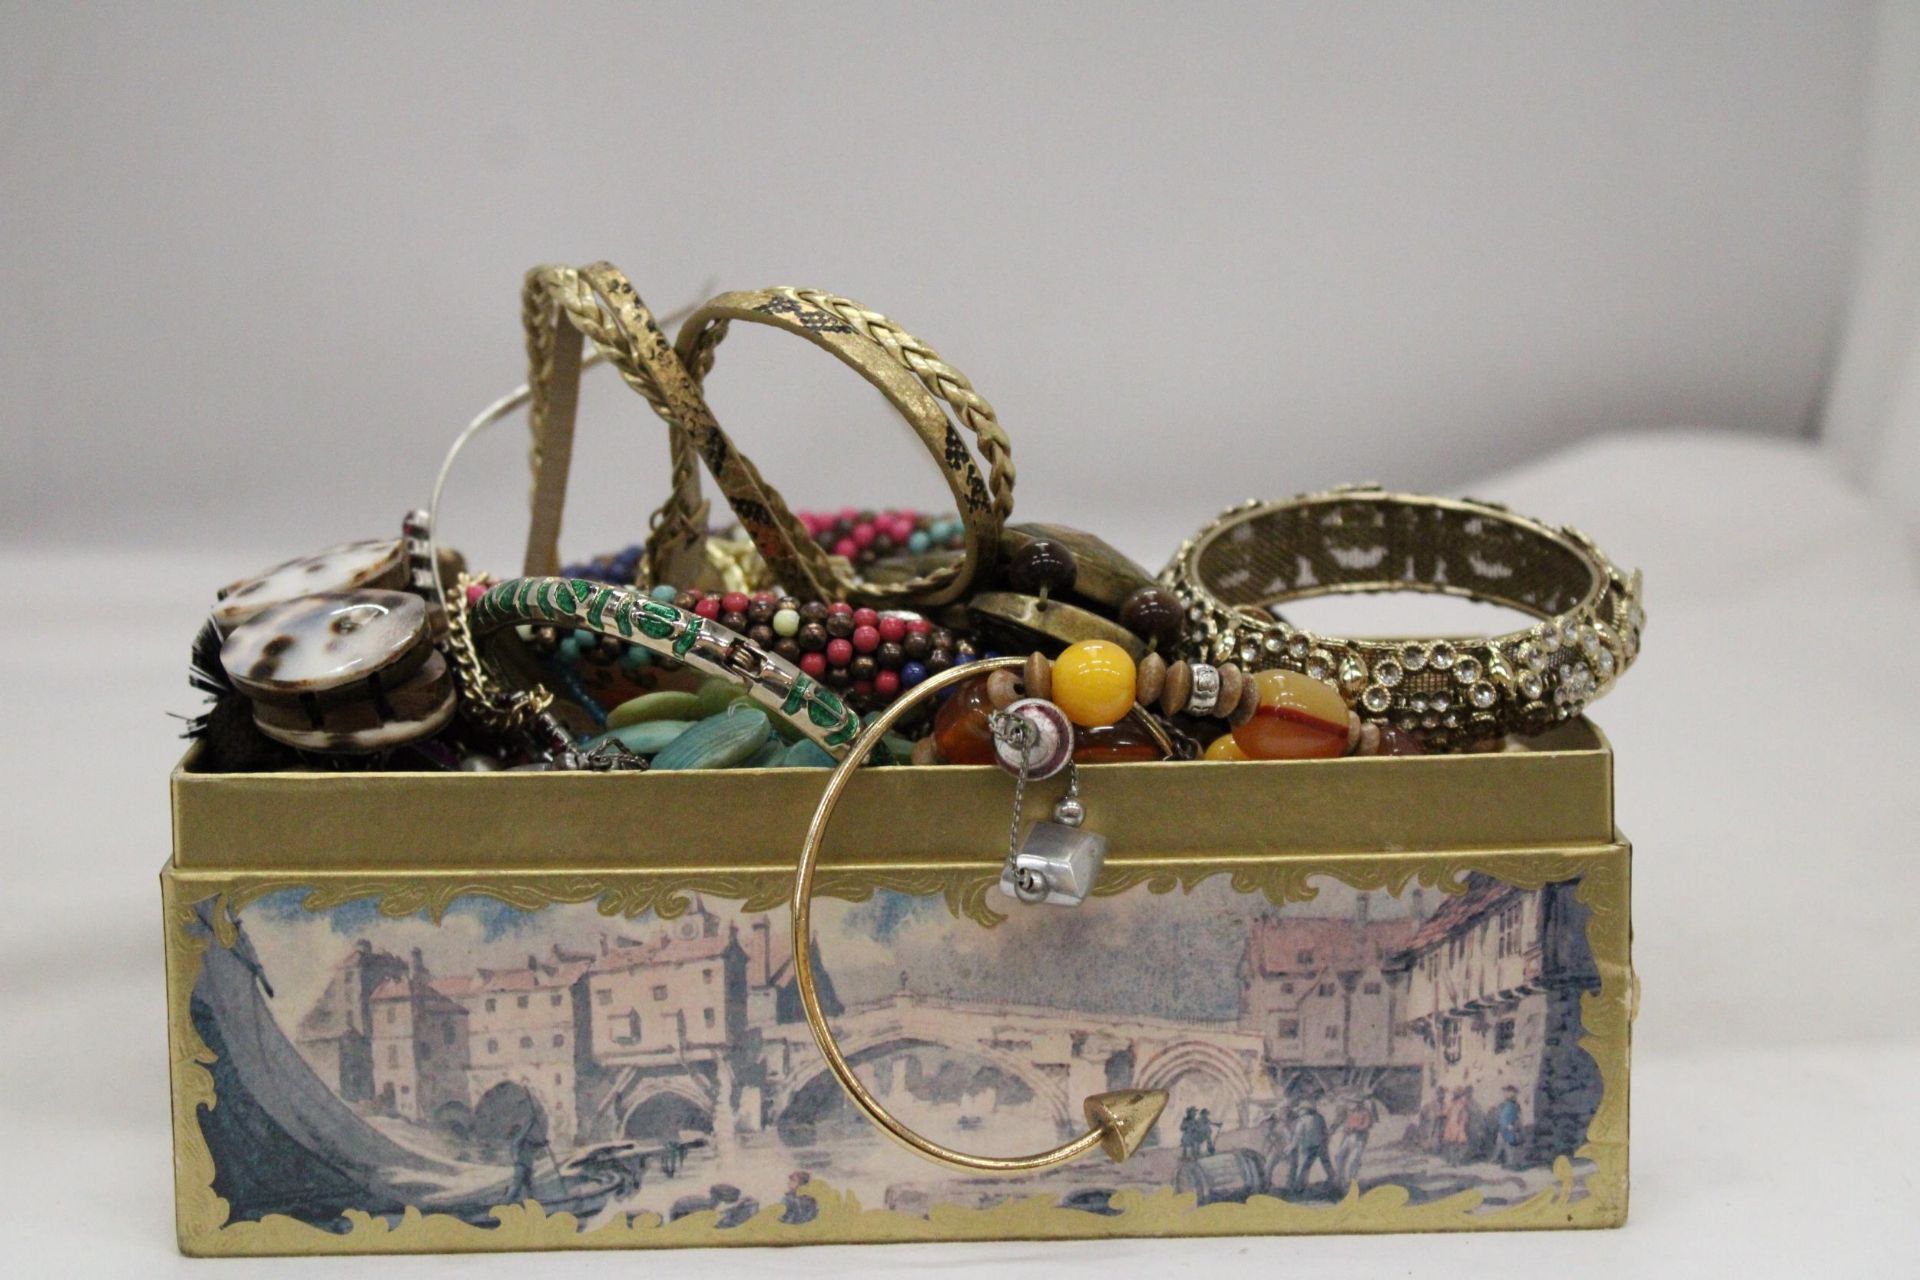 A QUANTITY OF COSTUME JEWELLERY TO INCLUDE NECKLACES, EARRINGS, BANGLES, ETC, IN A DOMED BOX - Image 2 of 5